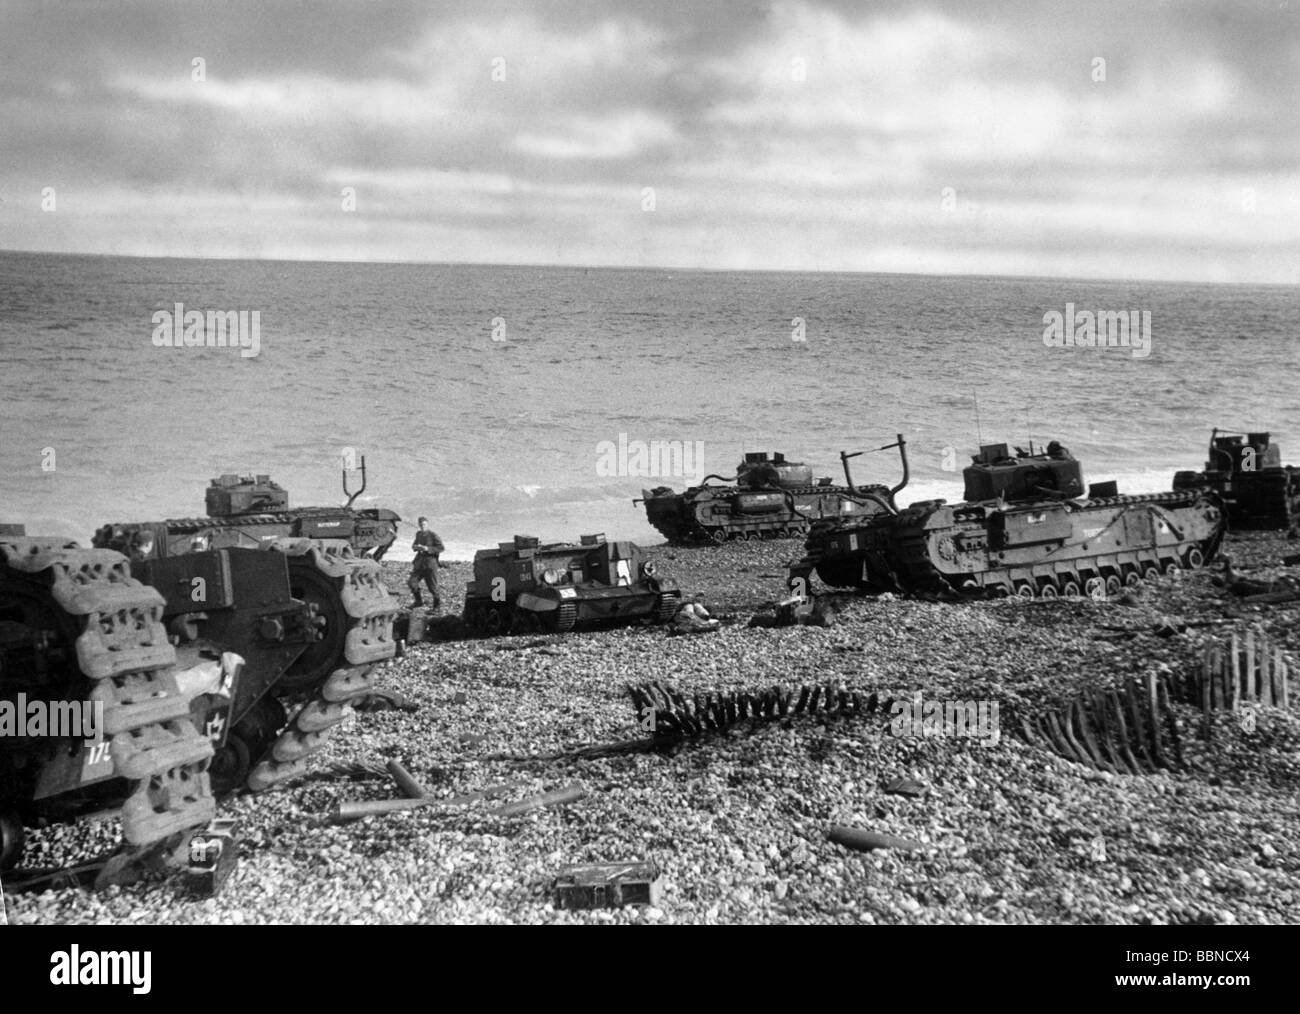 events, Second World War / WWII, France, Dieppe, 19.8.1942, destroyed 'Churchill' tanks of the 14th Canadian Army Tank Regiment (Calgary Tanks) on the beach, Stock Photo